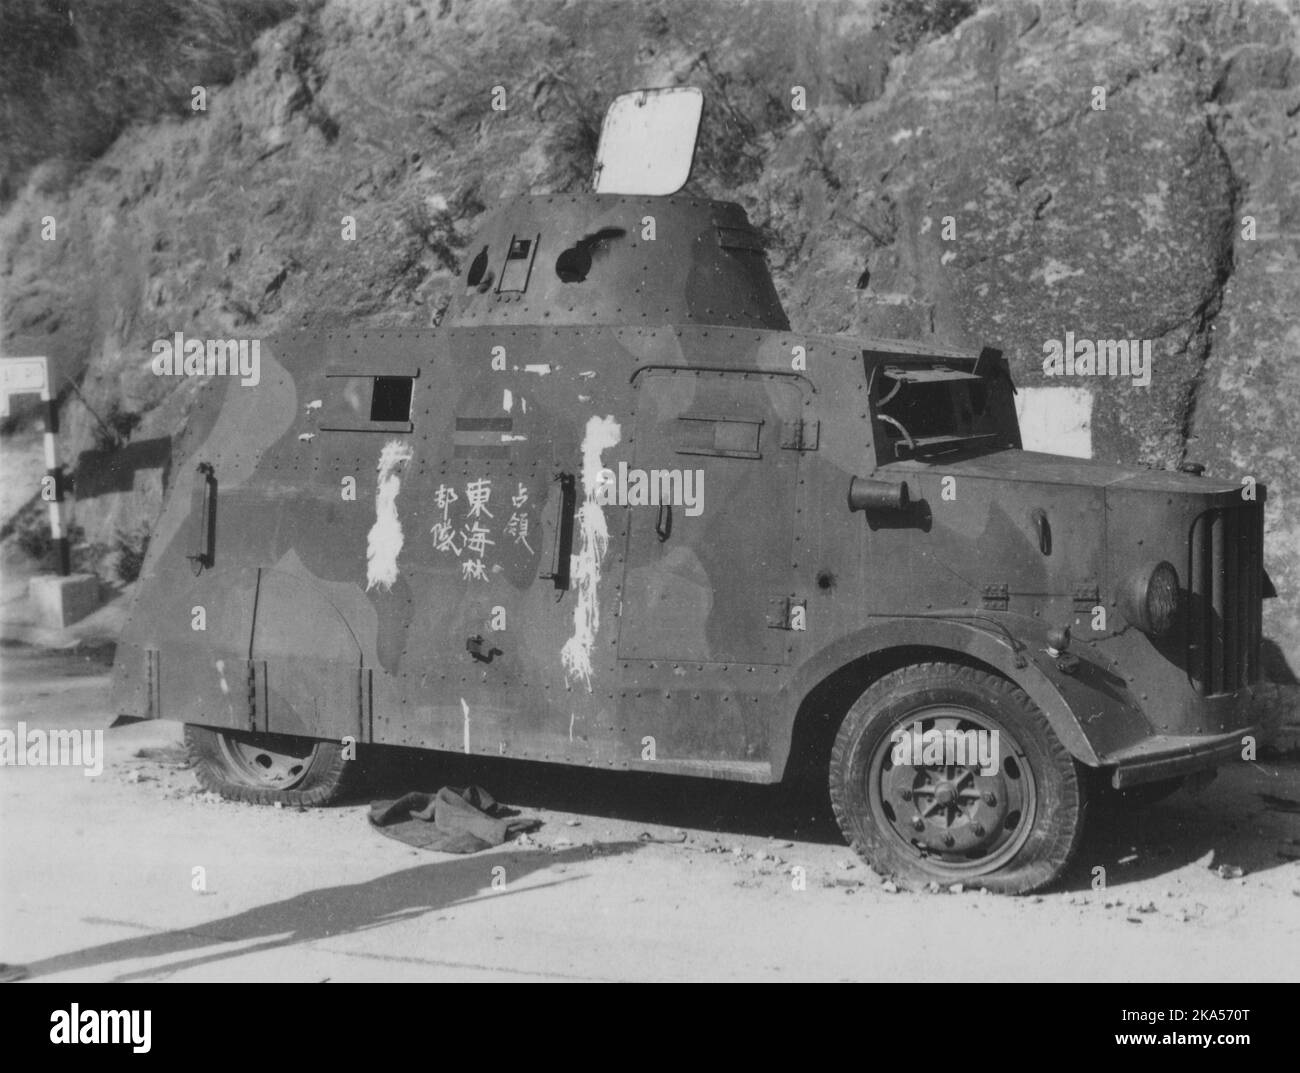 Pacific War, 1941-1945. A battered armored vehicle once belonging to the Hong Kong Volunteer Defense Corps sits abandoned with graffiti denoting its capture by the invading Imperial Japanese Army 230th Infantry Regiment, Battle of Hong Kong, December 1941. Stock Photo